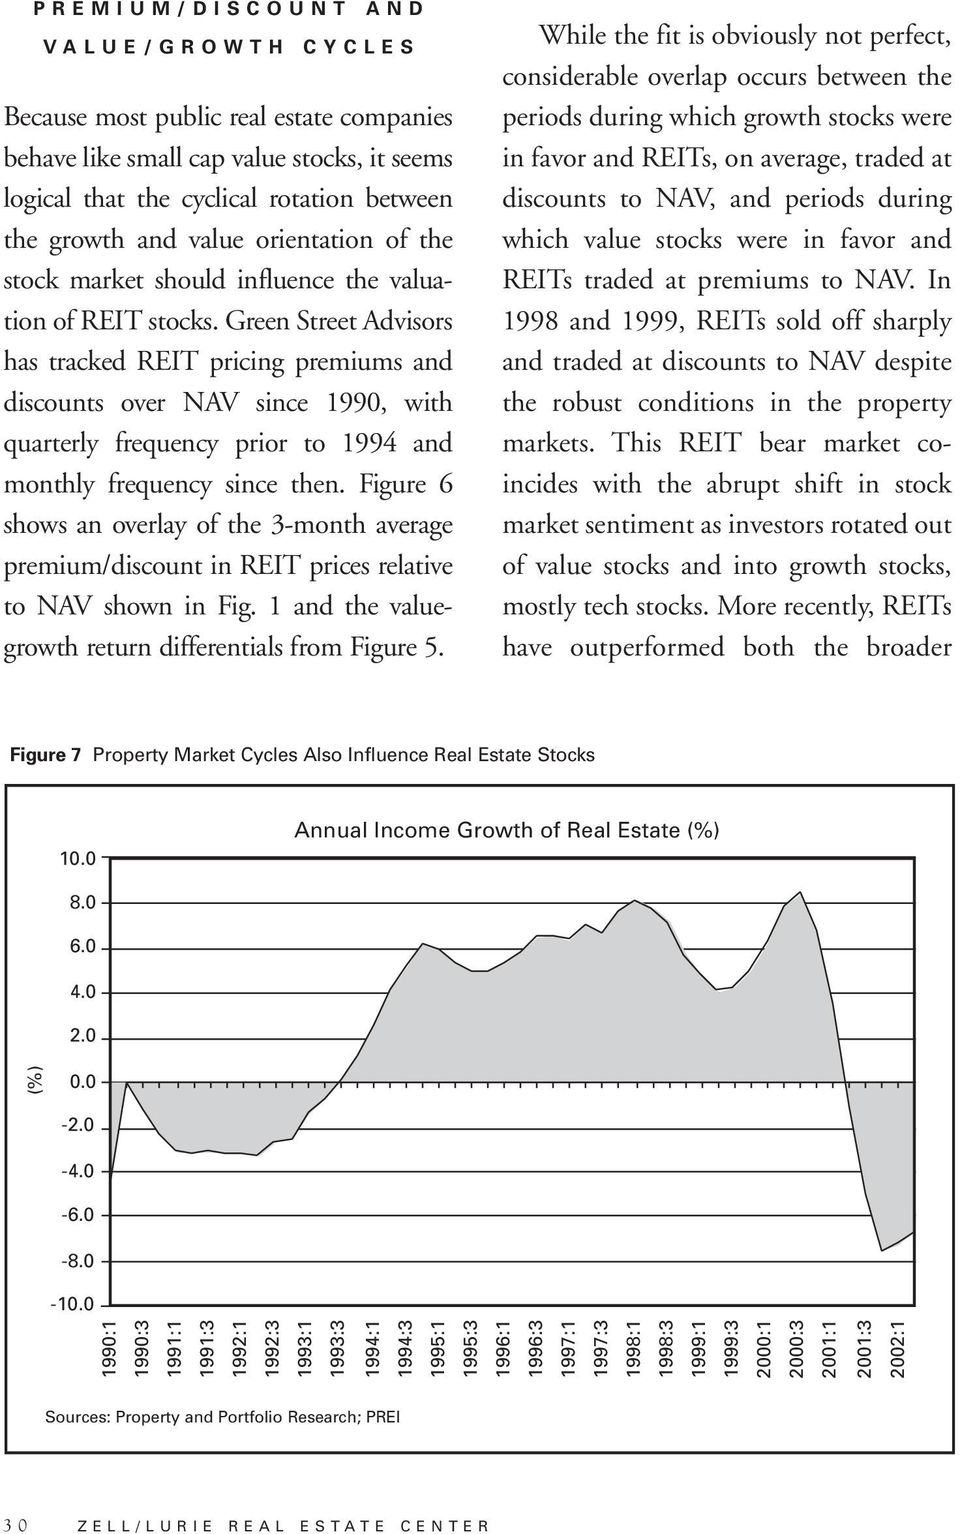 Green Street Advisors has tracked REIT pricing premiums and discounts over NAV since 1990, with quarterly frequency prior to 1994 and monthly frequency since then.